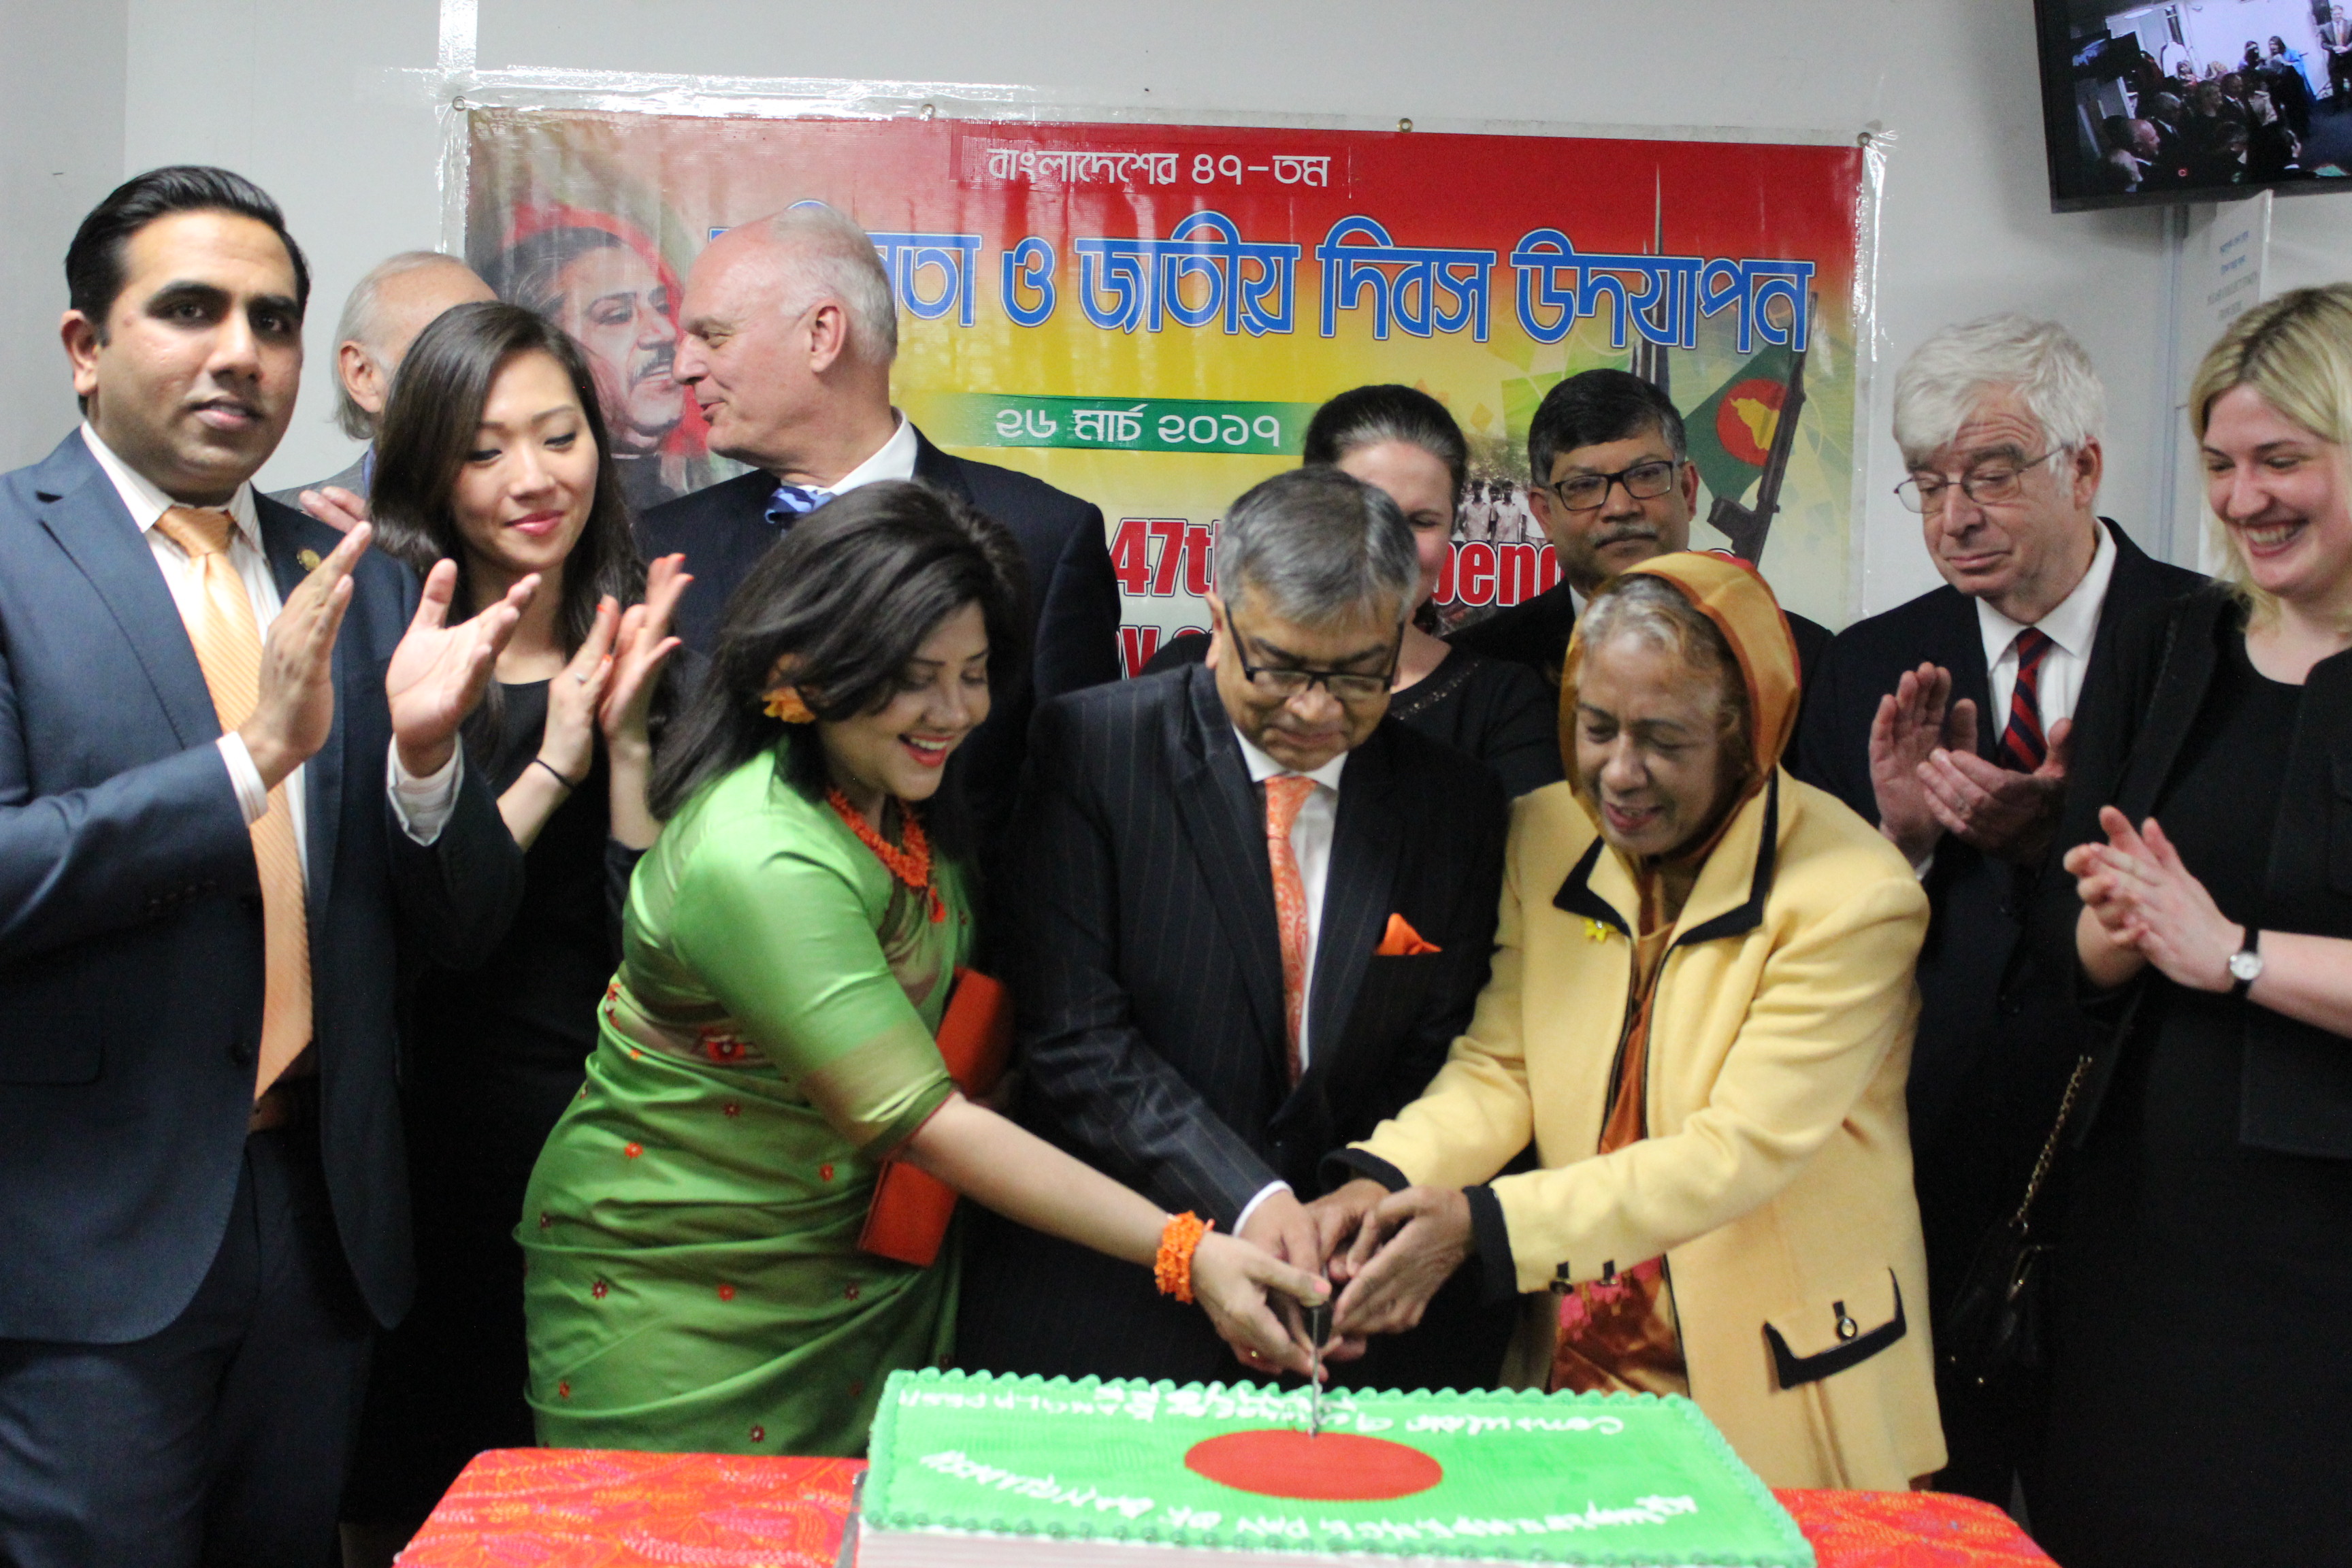 Bangladesh Consulate General in New York celebrates 46th Anniversary of the Independence and National Day of Bangladesh